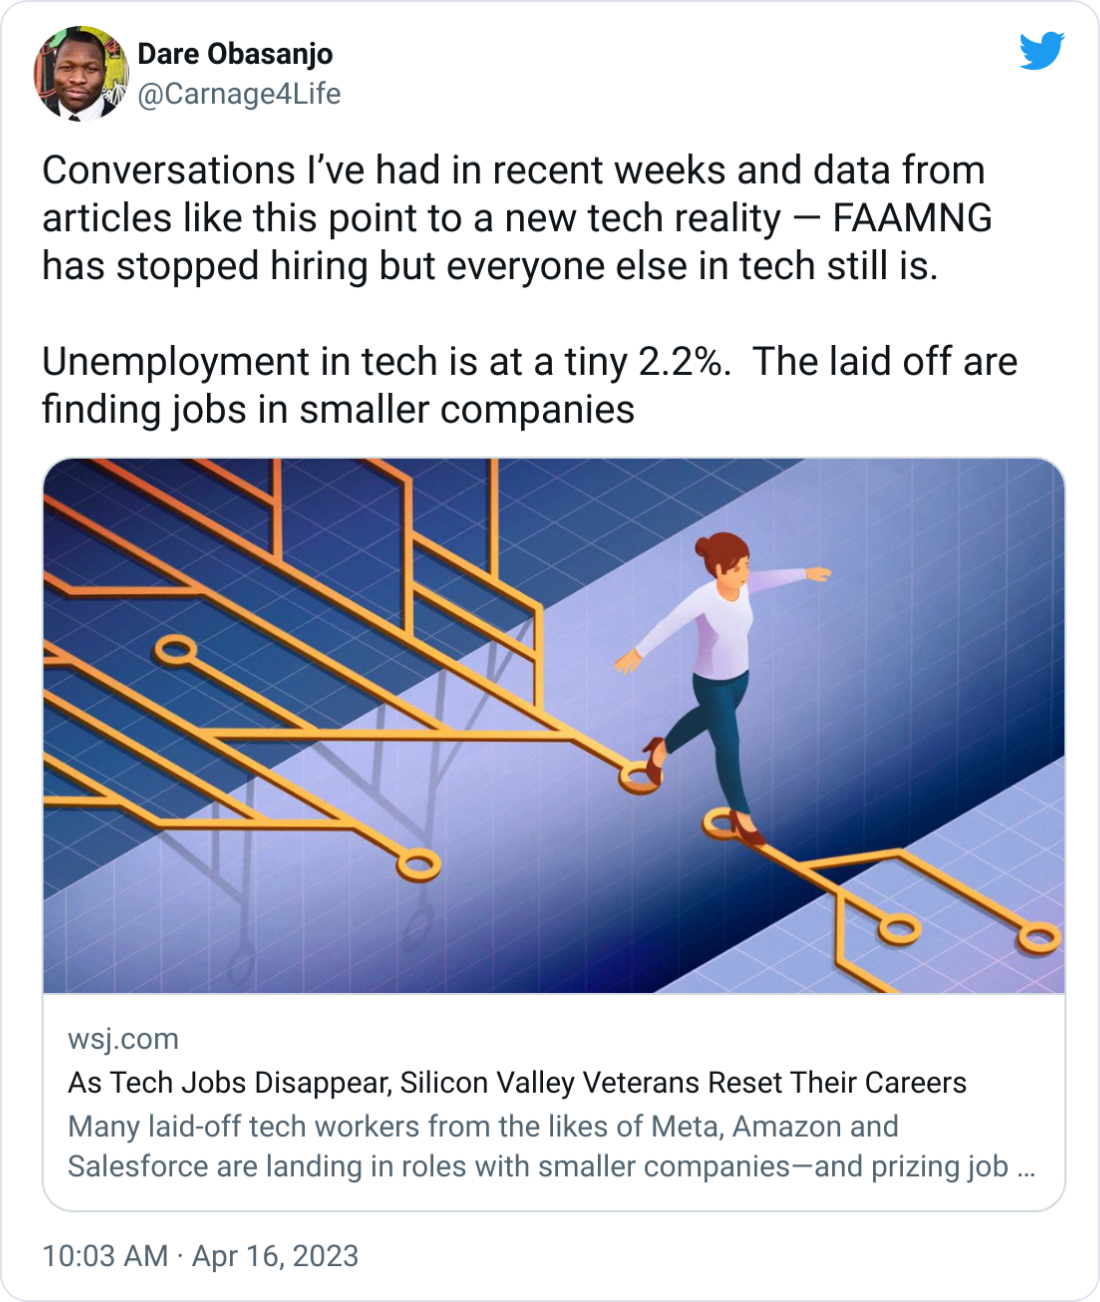 Conversations I’ve had in recent weeks and data from articles like this point to a new tech reality — FAAMNG has stopped hiring but everyone else in tech still is.  Unemployment in tech is at a tiny 2.2%.  The laid off are finding jobs in smaller companies